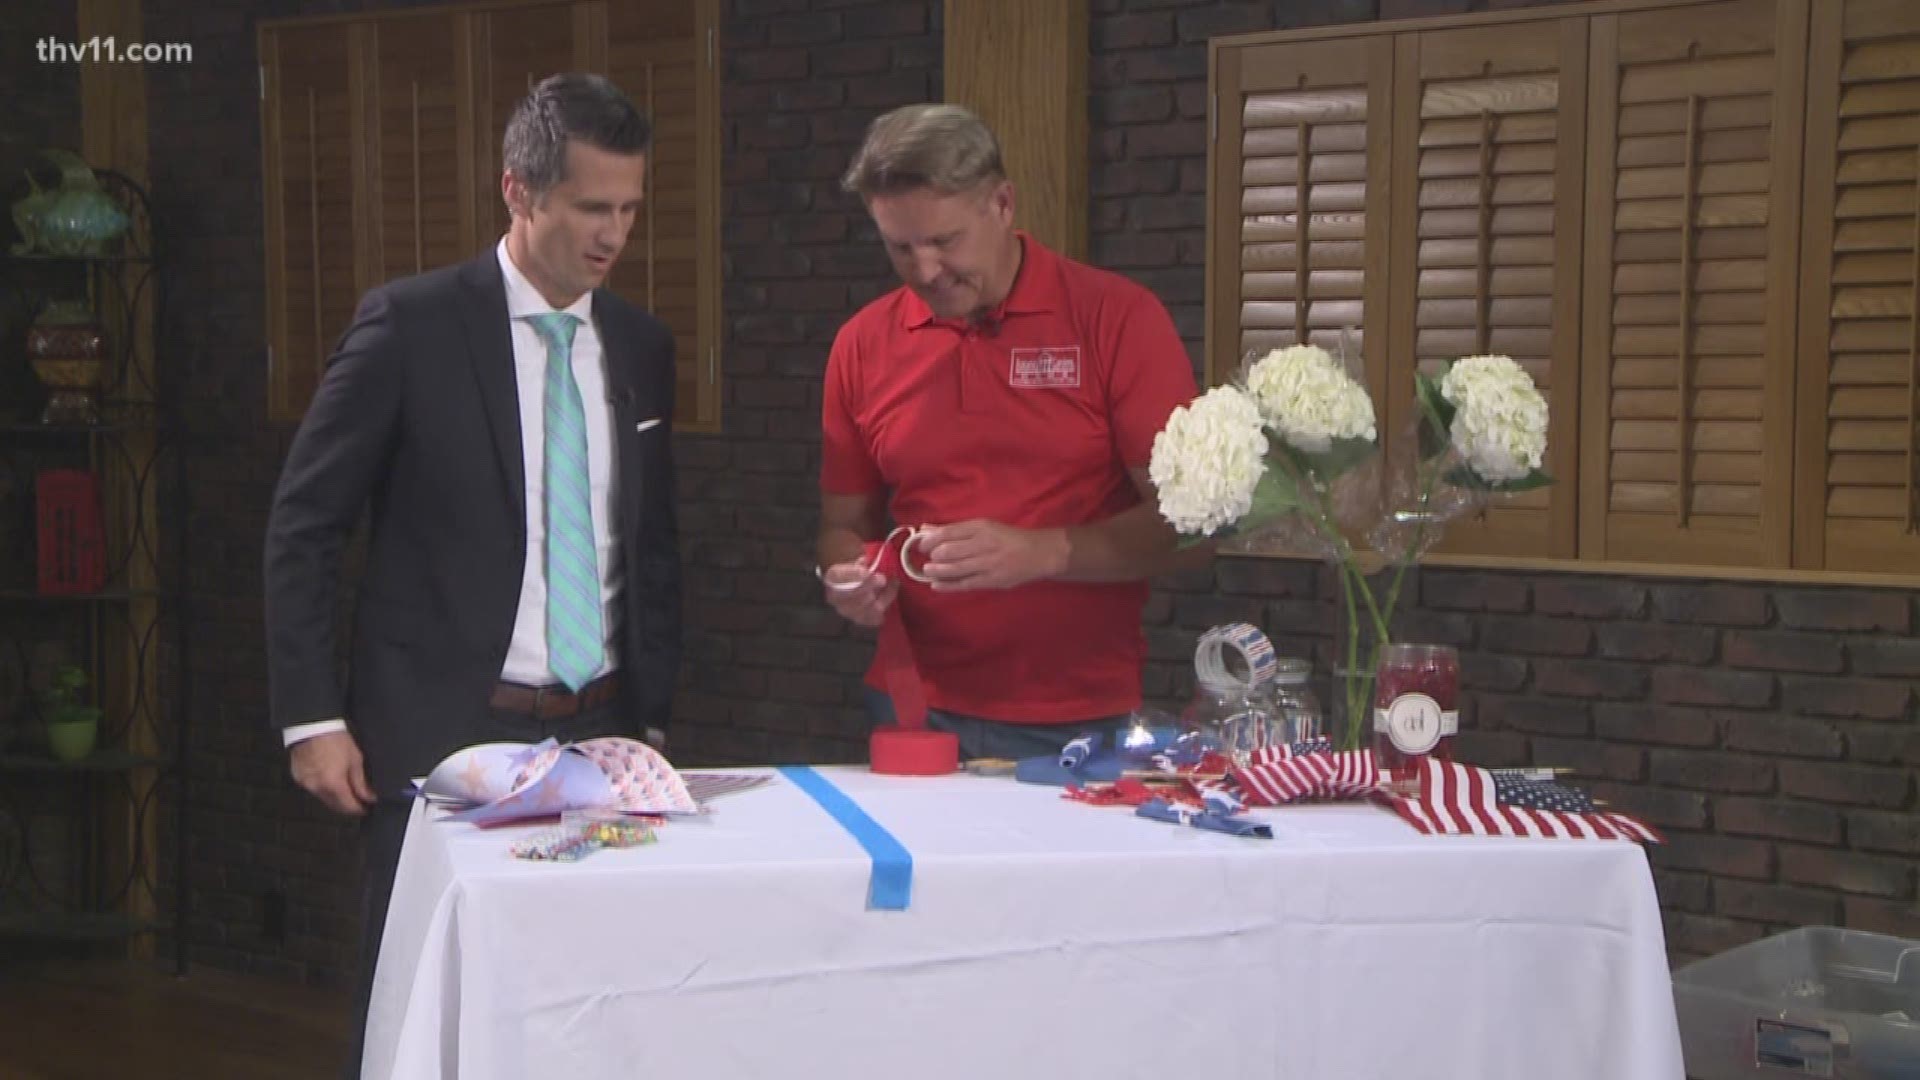 Chris H. Olsen shows us how to celebrate America's birthday with a festive tablescape.